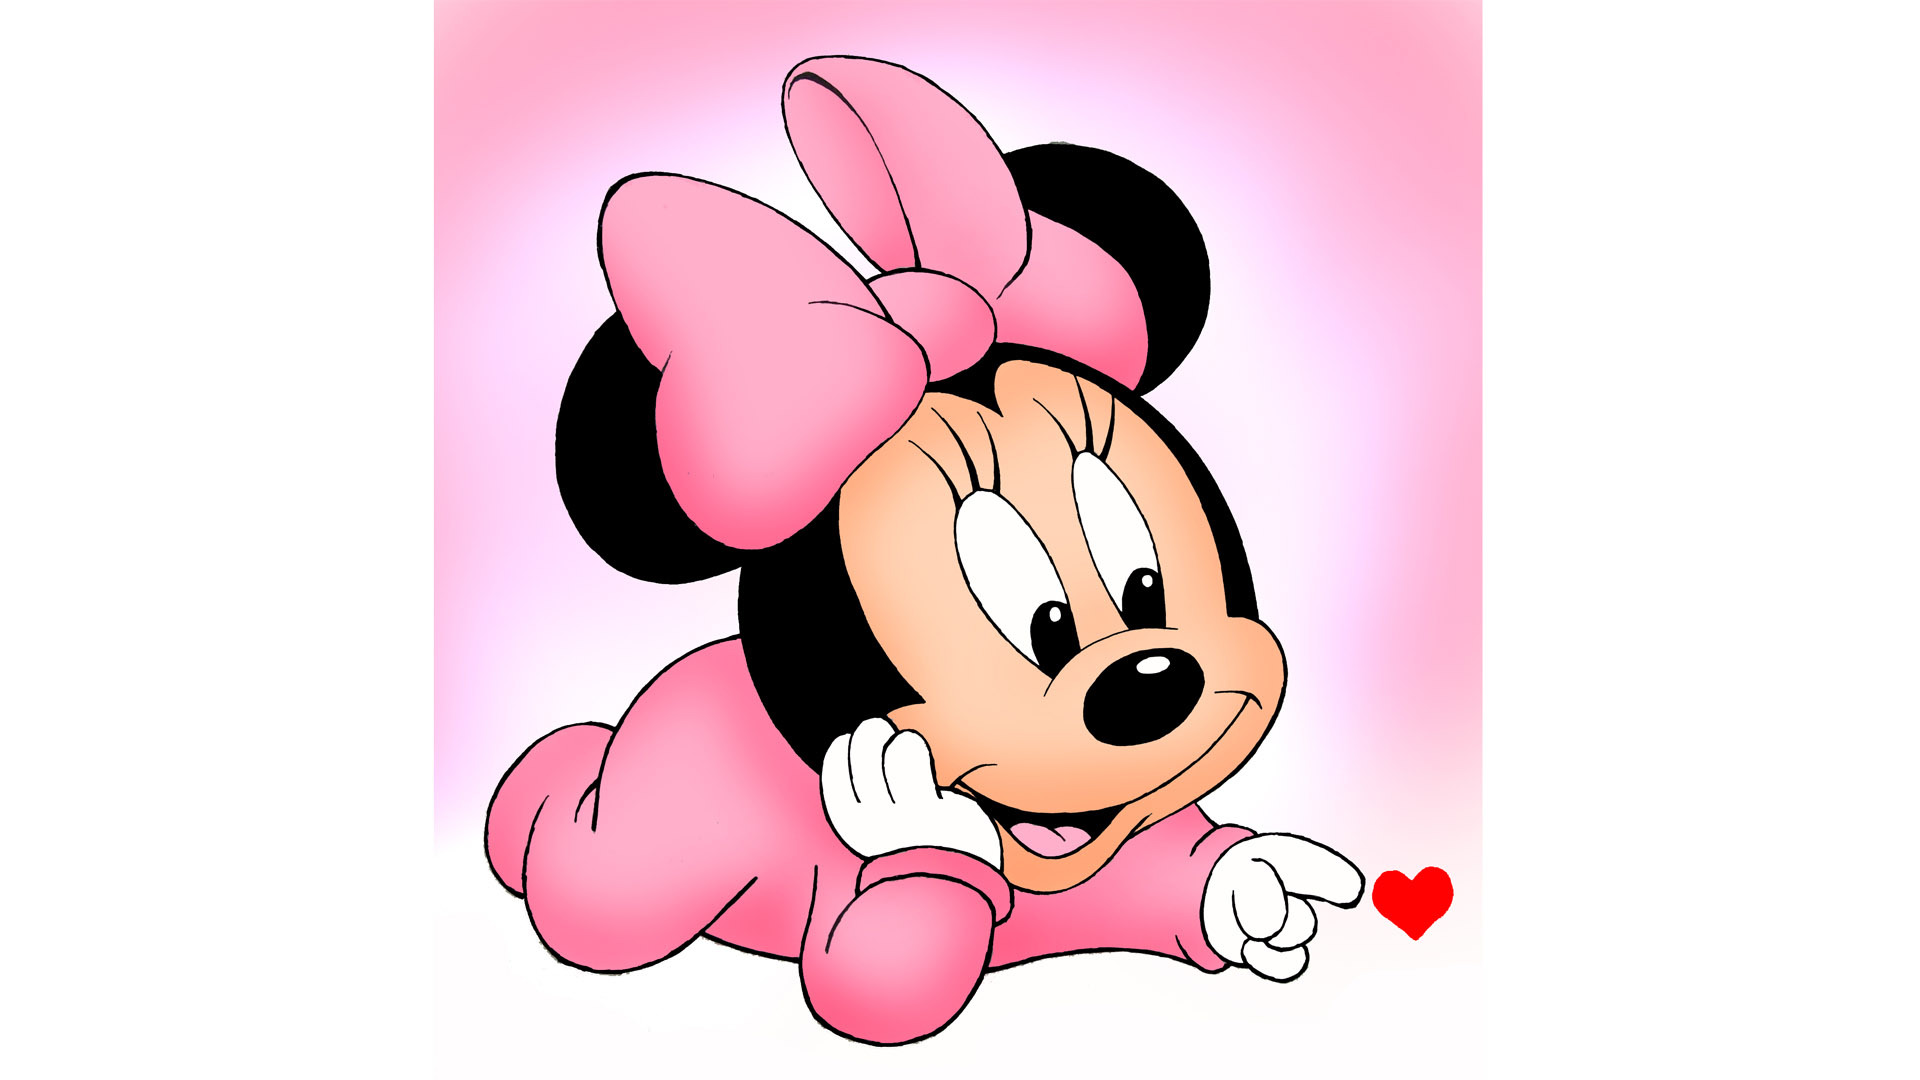 Wallpapers Of Minnie Mouse Minnie Mouse Wallpapers Hd Pixelstalk Adam Kay